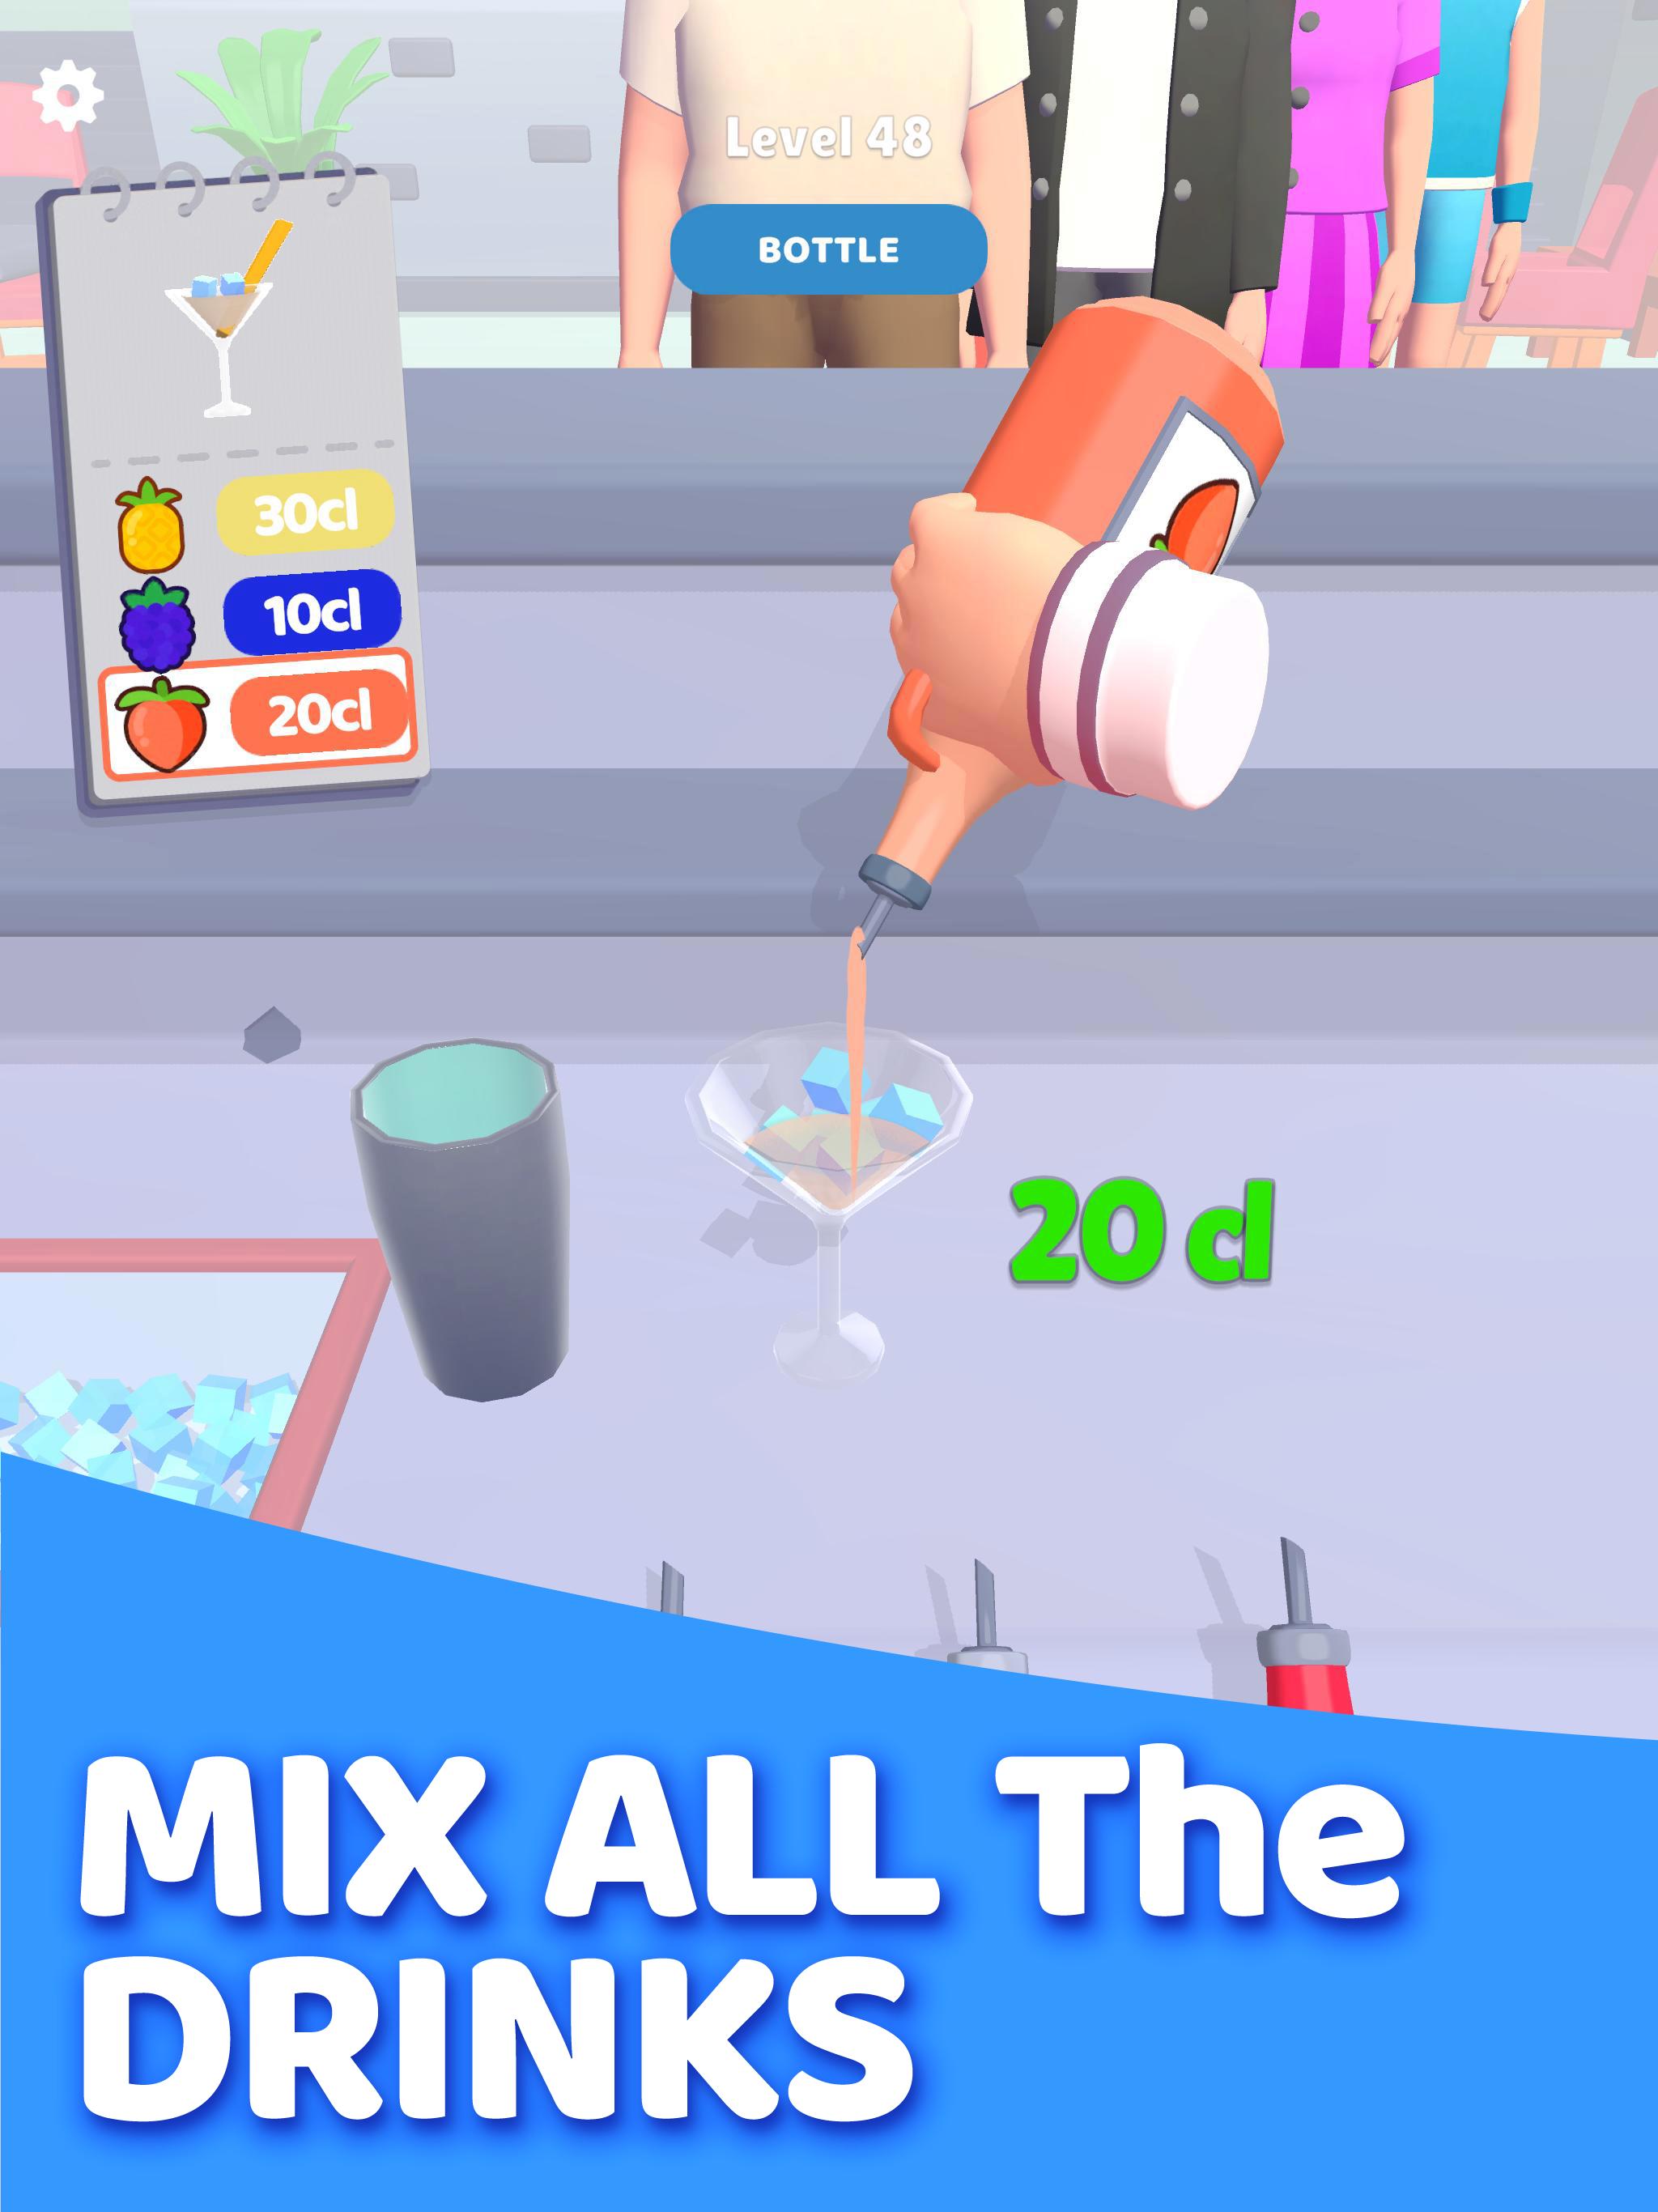 Mix and Drink for Android - APK Download